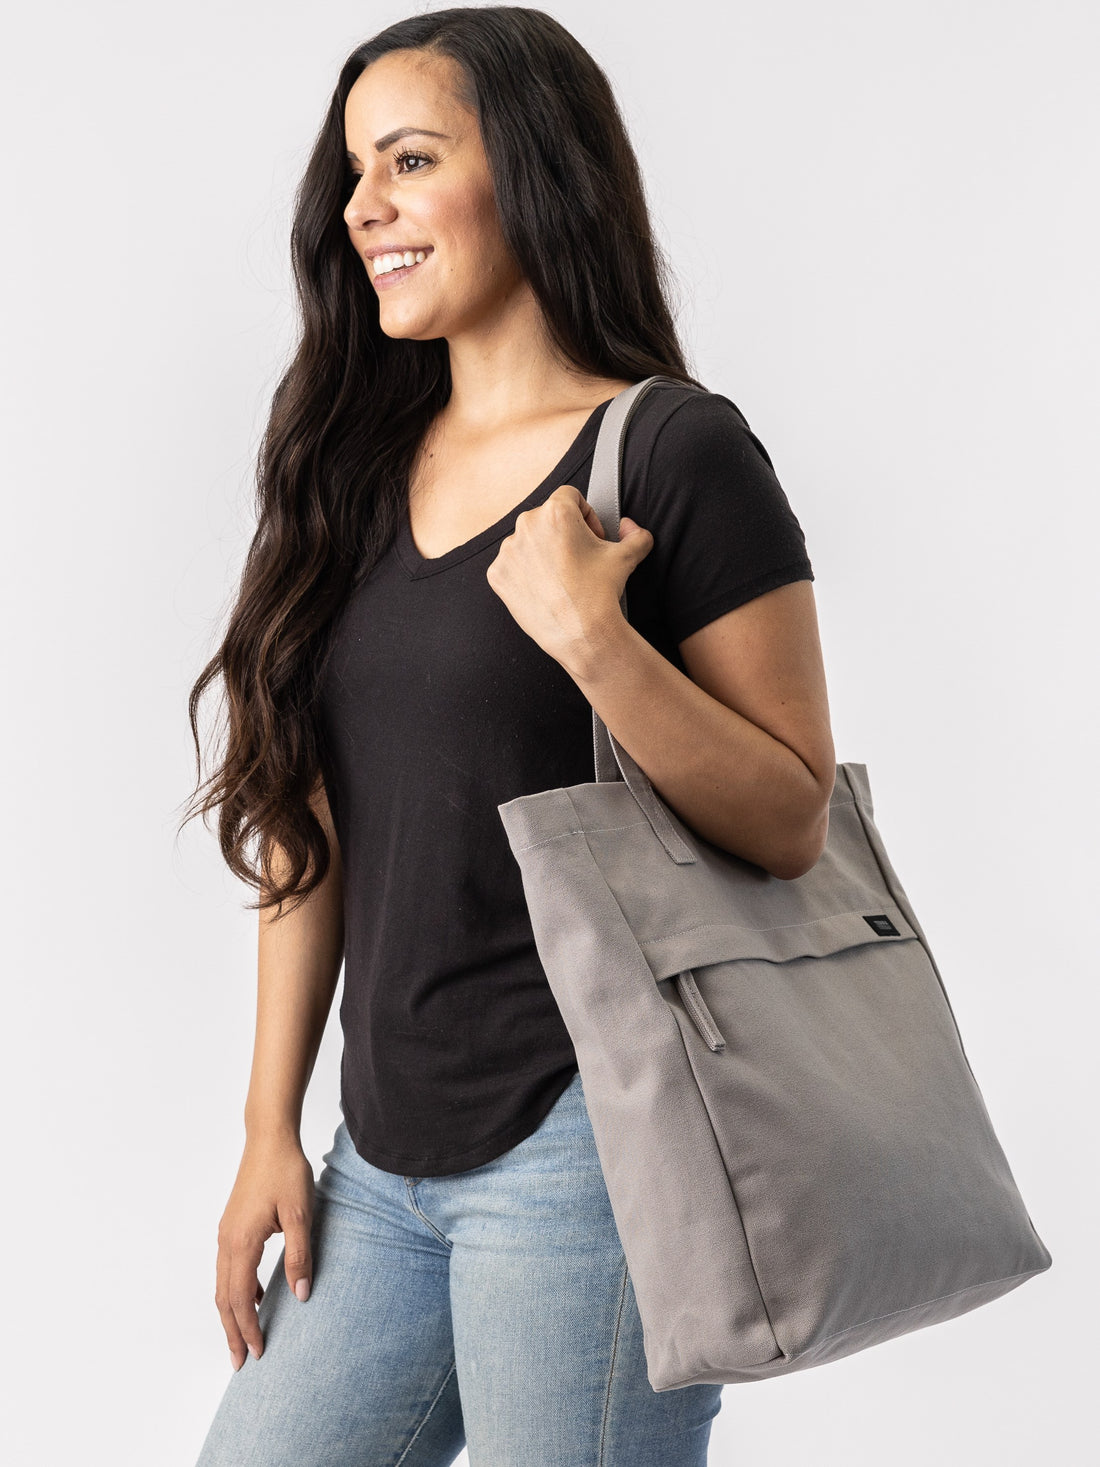 Tote Bags for Work  Eco-friendly Cotton Canvas Tote Bags – Terra Thread